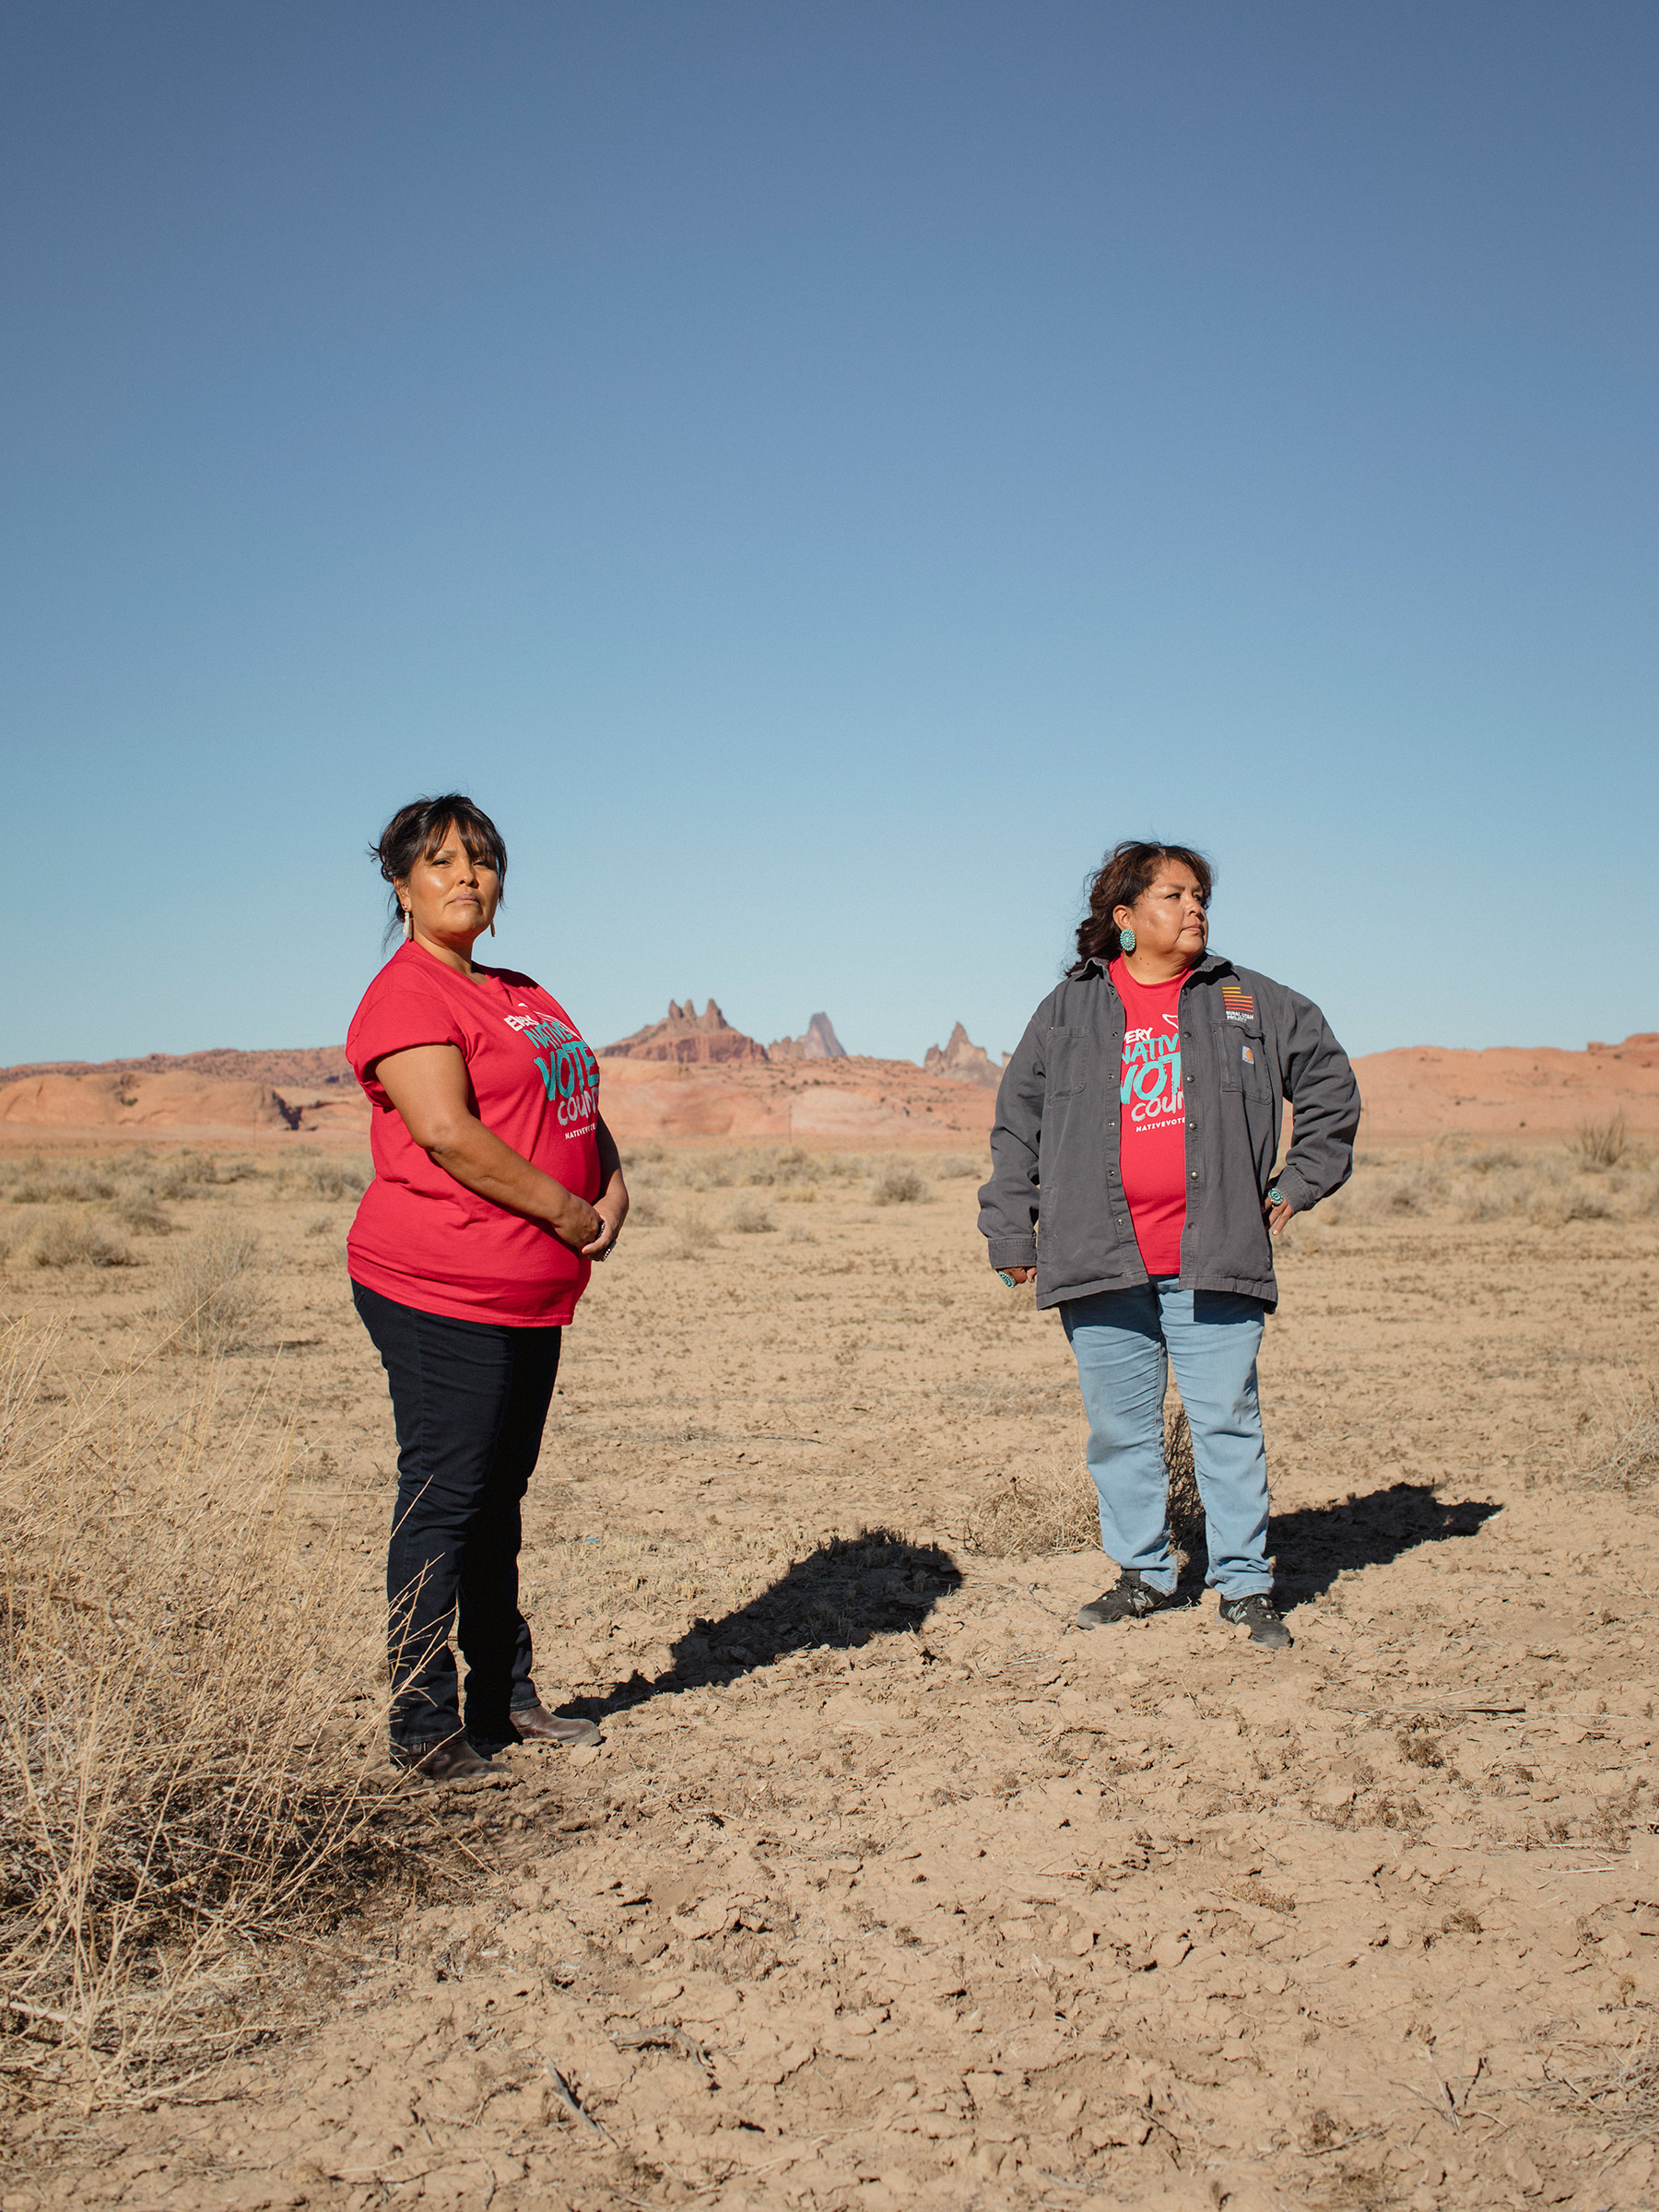 (L-R) Tara Benally and Dalene Redhorse pose for a portrait in front of Church Rock in Navajo County, Arizona on December 4, 2020. CREDIT: Adria Malcolm for TIME Magazine (Adria Malcolm for TIME Magazine—Adria Malcolm)